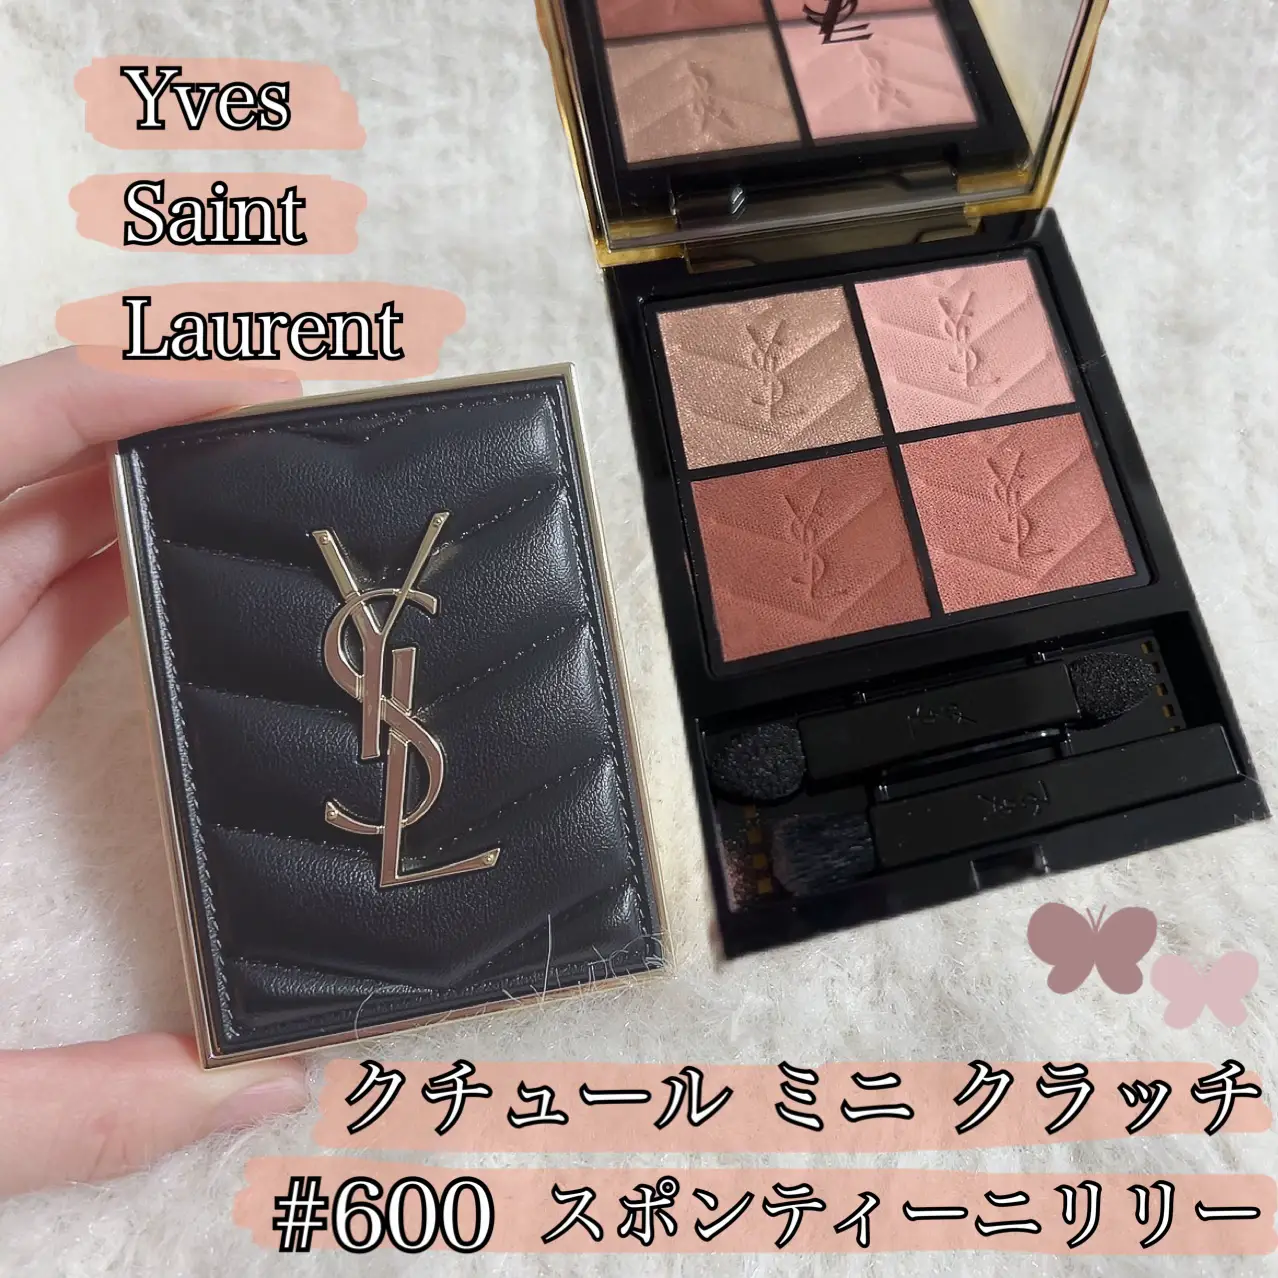 YSL Couture Mini Clutch # 600 | Gallery posted by めろんぱん | Lemon8